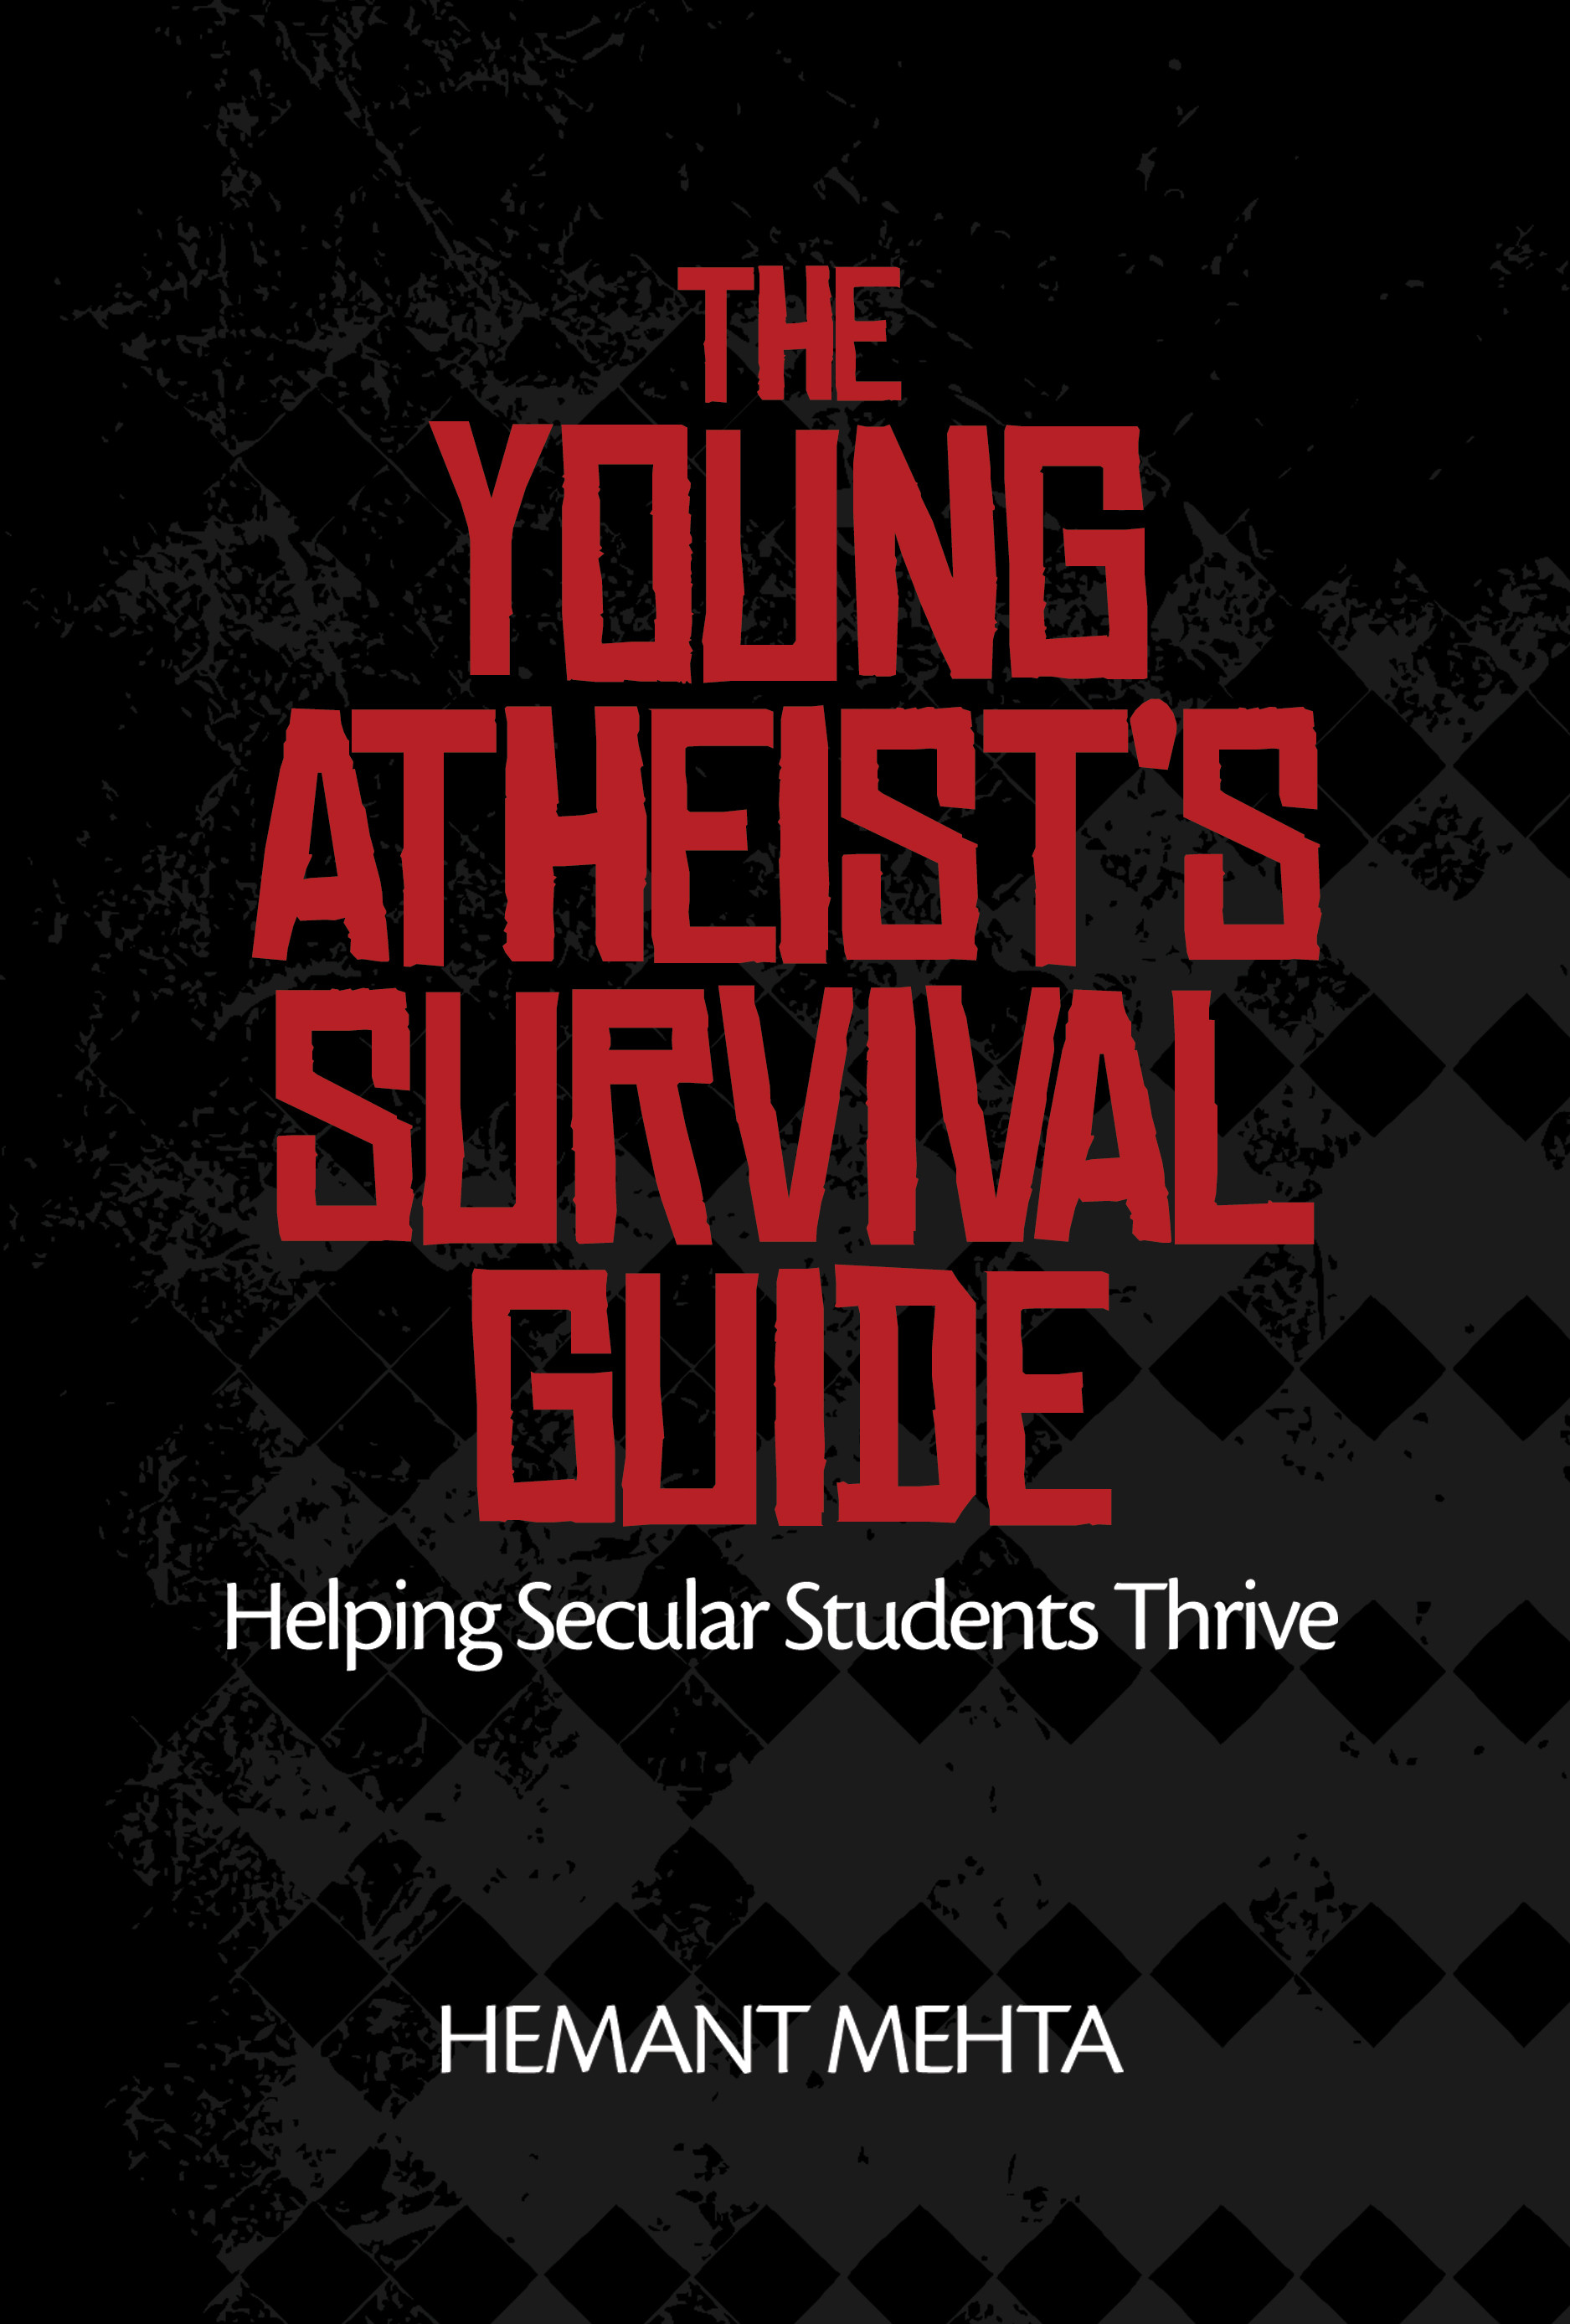 My New Book is Now Available! Introducing <em>The Young Atheist’s Survival Guide</em>